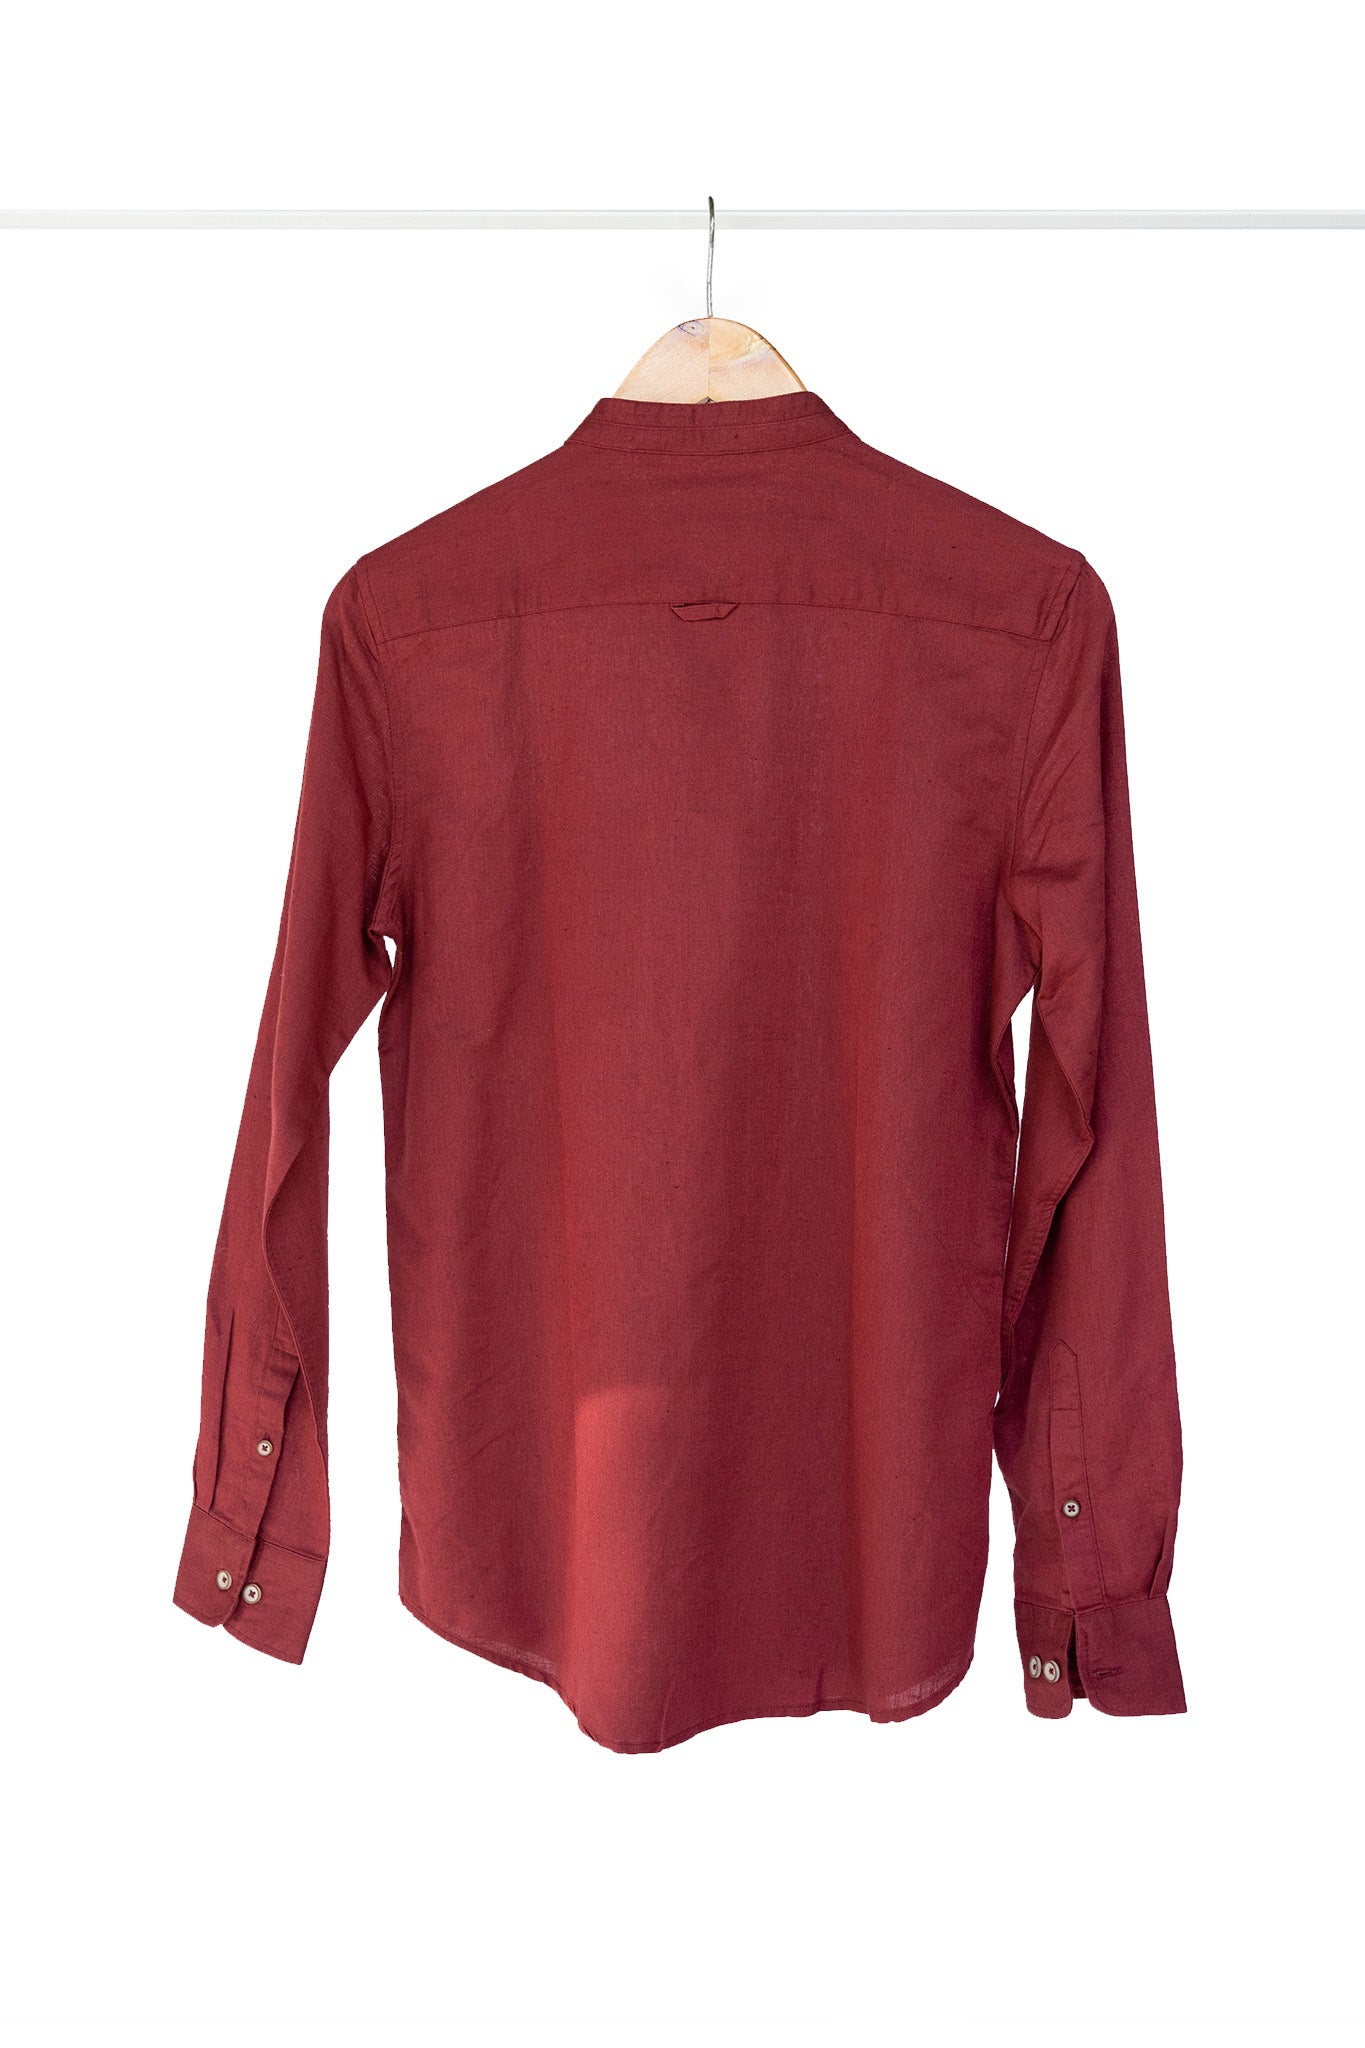 Bare Brown Mandarin Collar Cotton Linen Shirt, Slim Fit with Full Sleeves - Maroon